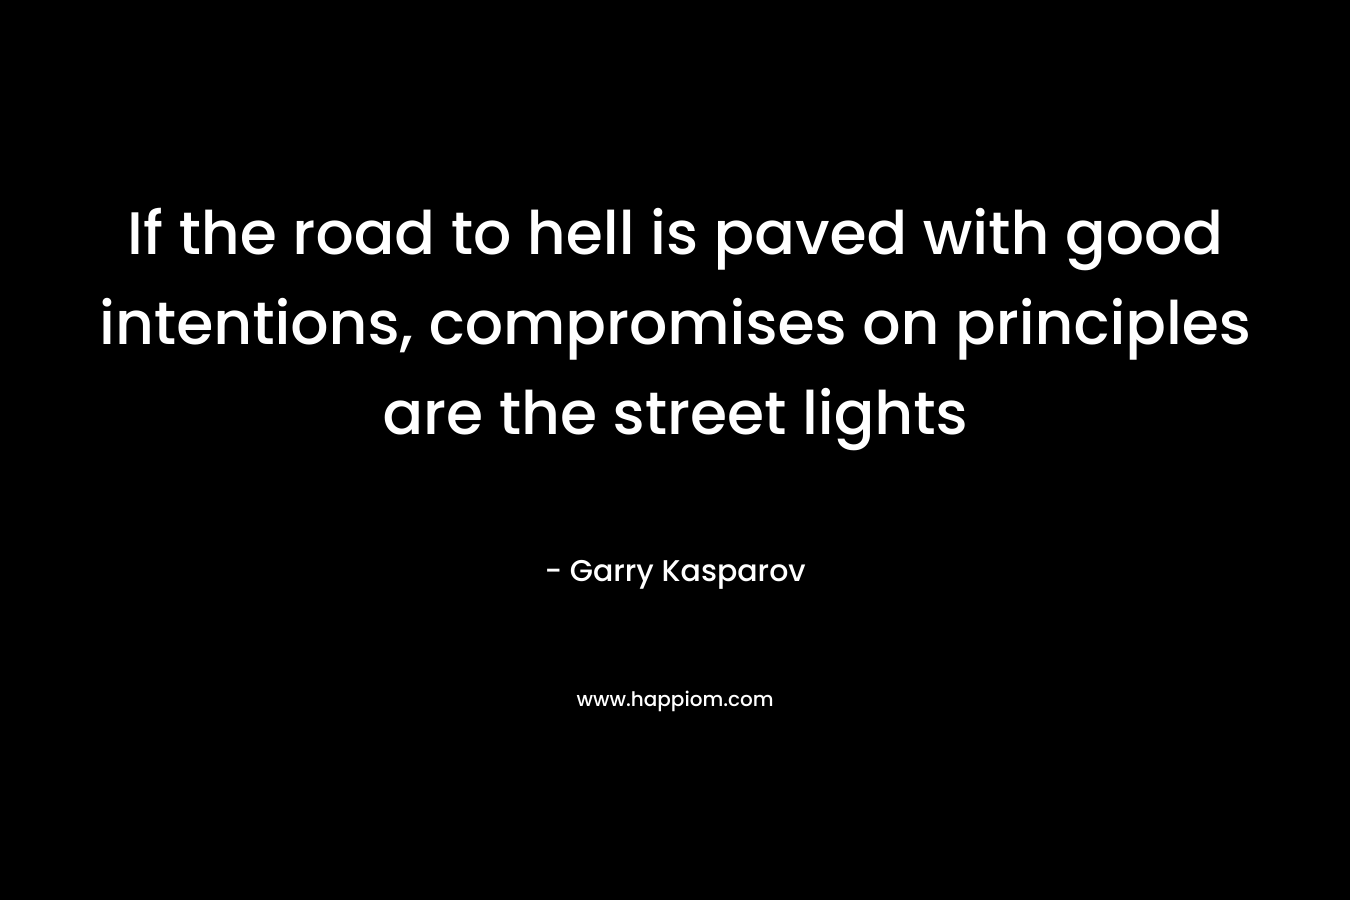 If the road to hell is paved with good intentions, compromises on principles are the street lights – Garry Kasparov